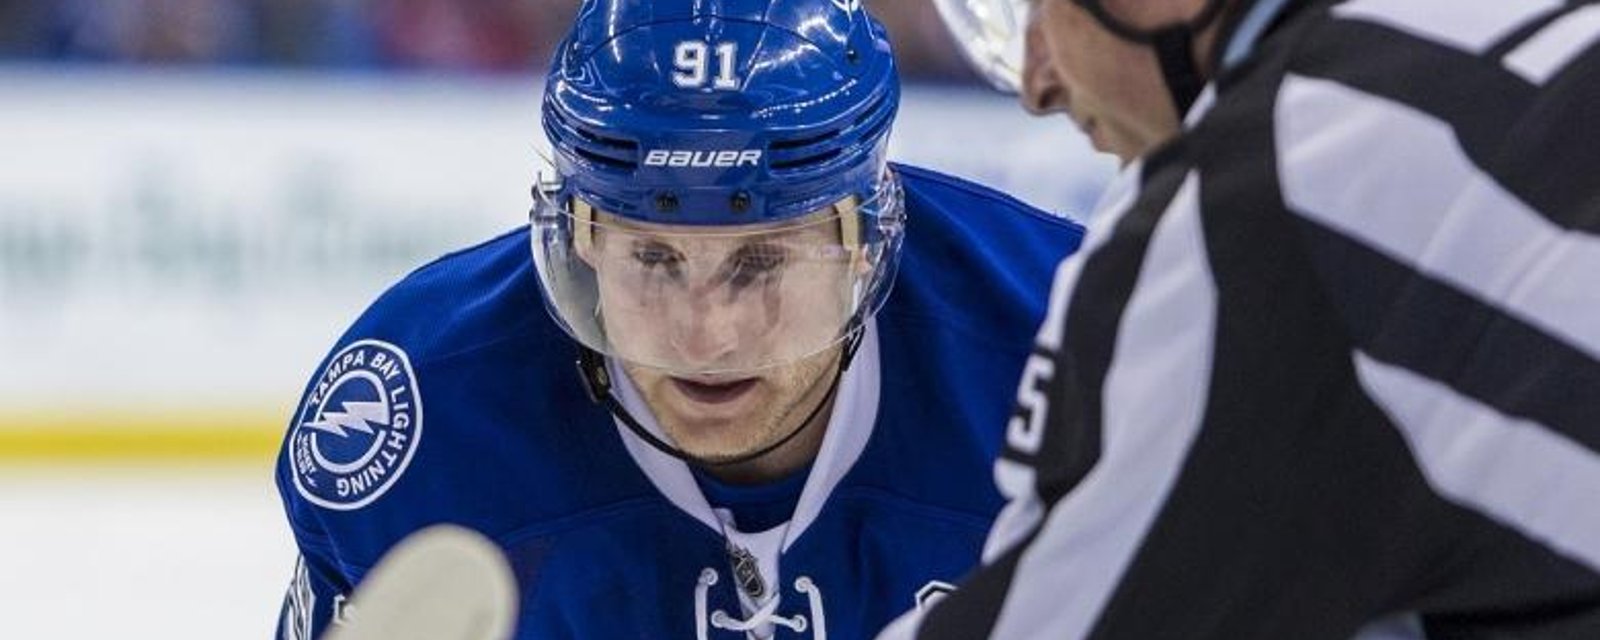 Another NHL team may consider a making a play for Stamkos.